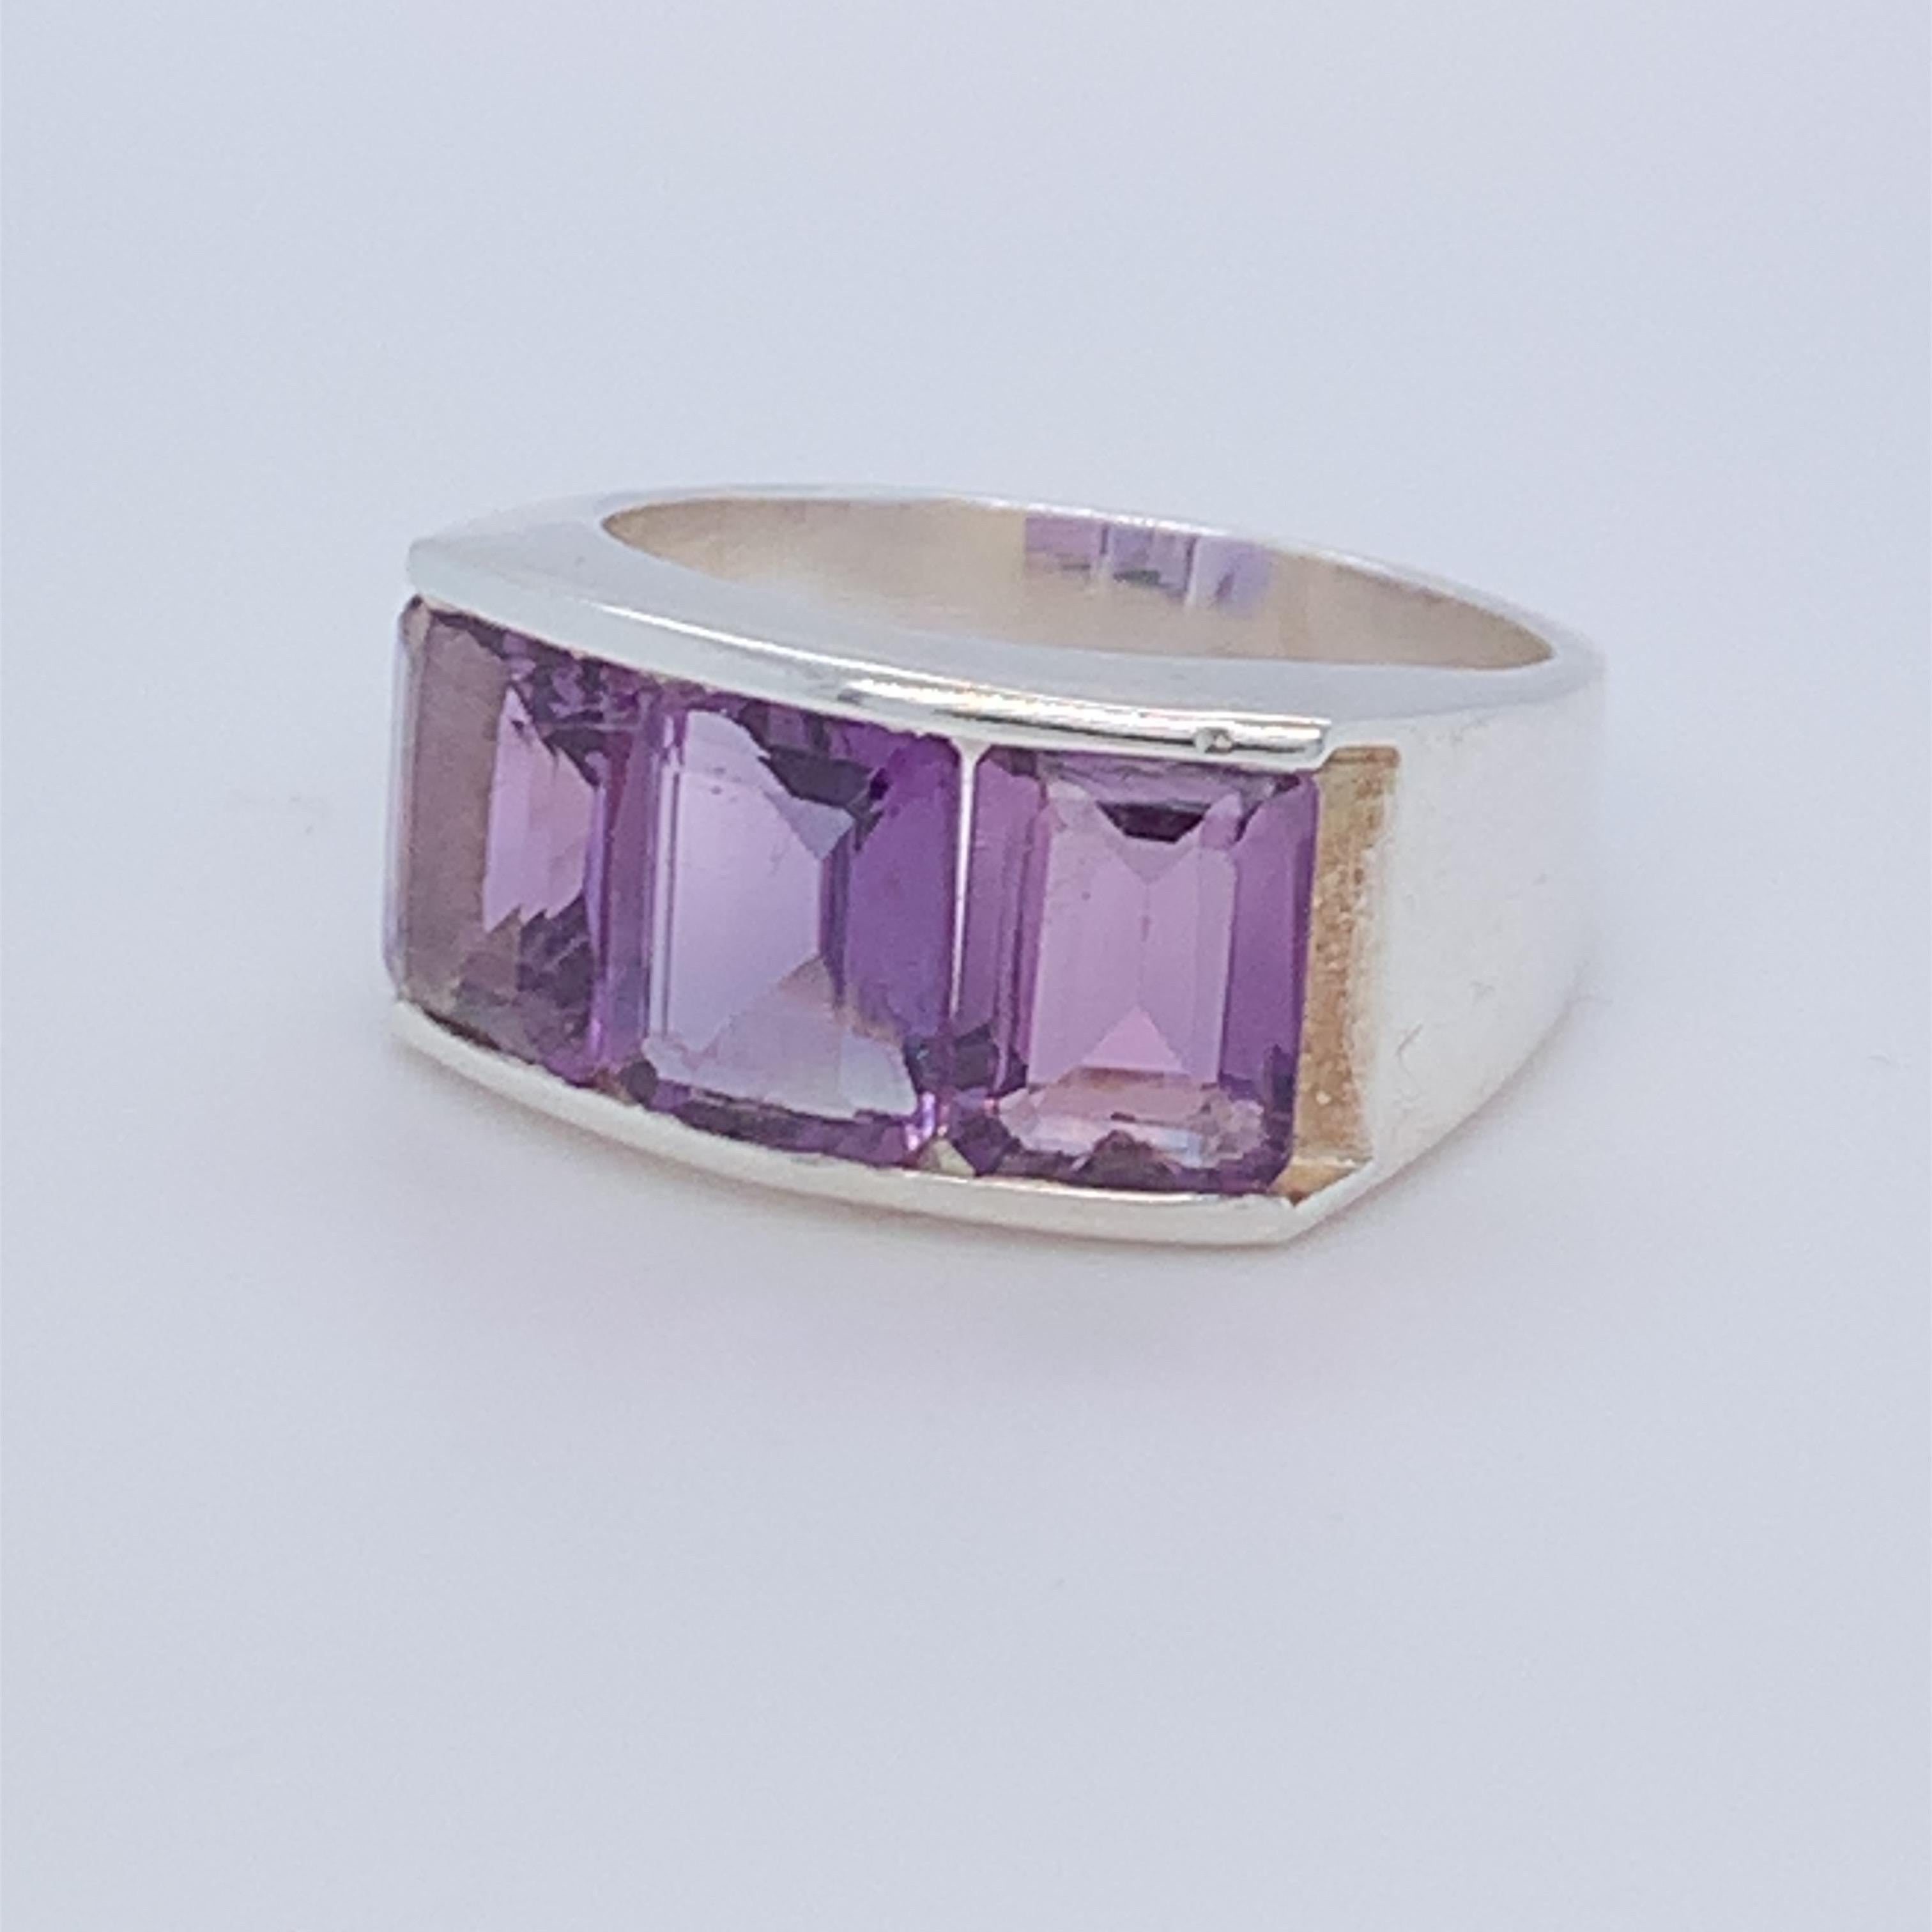 This beautiful half band ring boasts three emerald cut amethyst. Birthstone of the month of February. it is simple, plain and suitable for day wear. Set in sterling silver and hand made by master craftsman.

Amethyst: 6.00ct (approx)
Size: 9